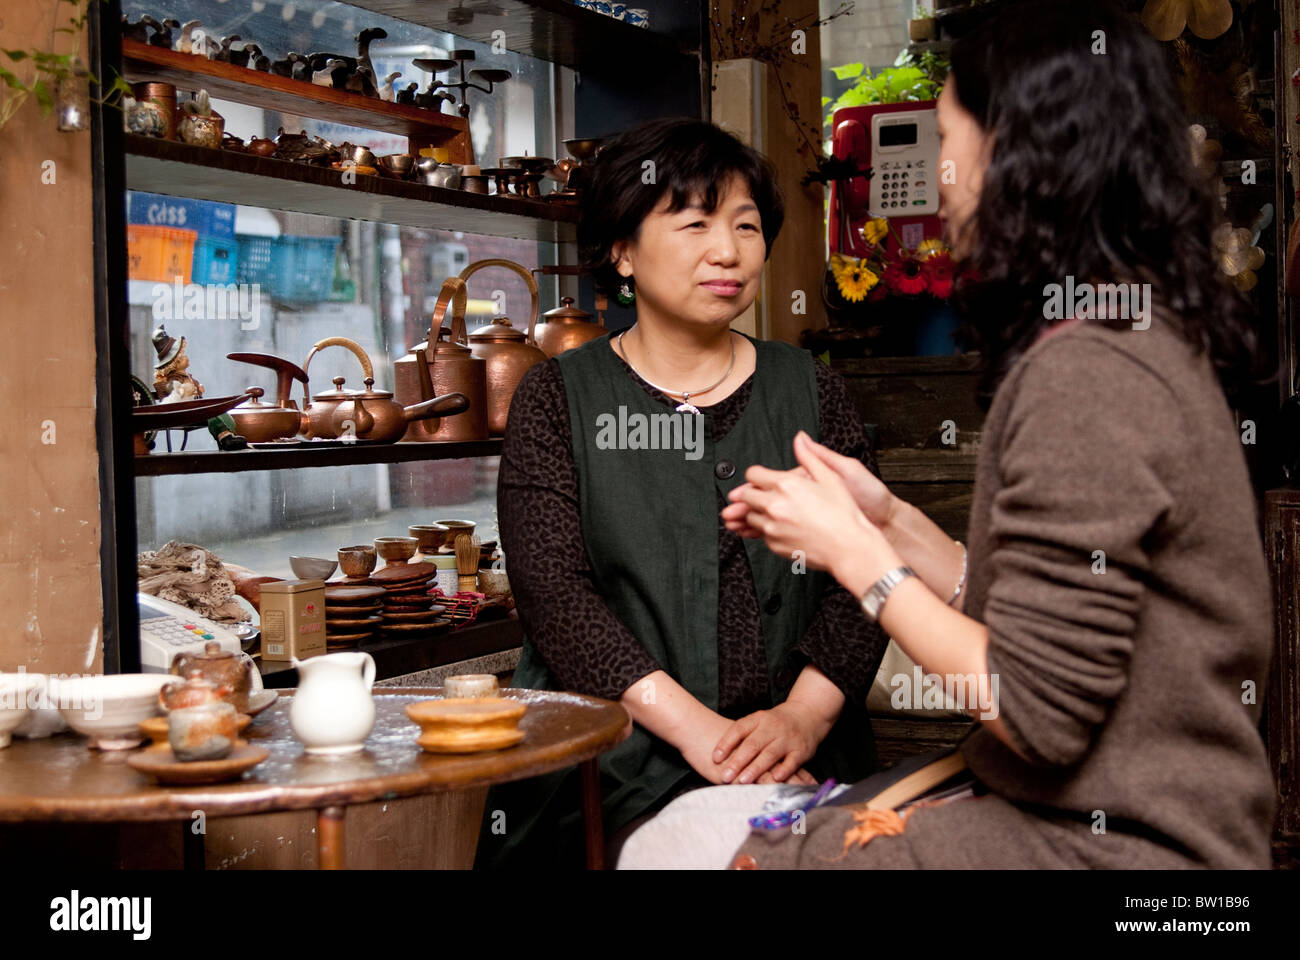 A Korean jewelry and accessory shop owner talking and having tea with a guest, Insadong, Seoul, South Korea Stock Photo